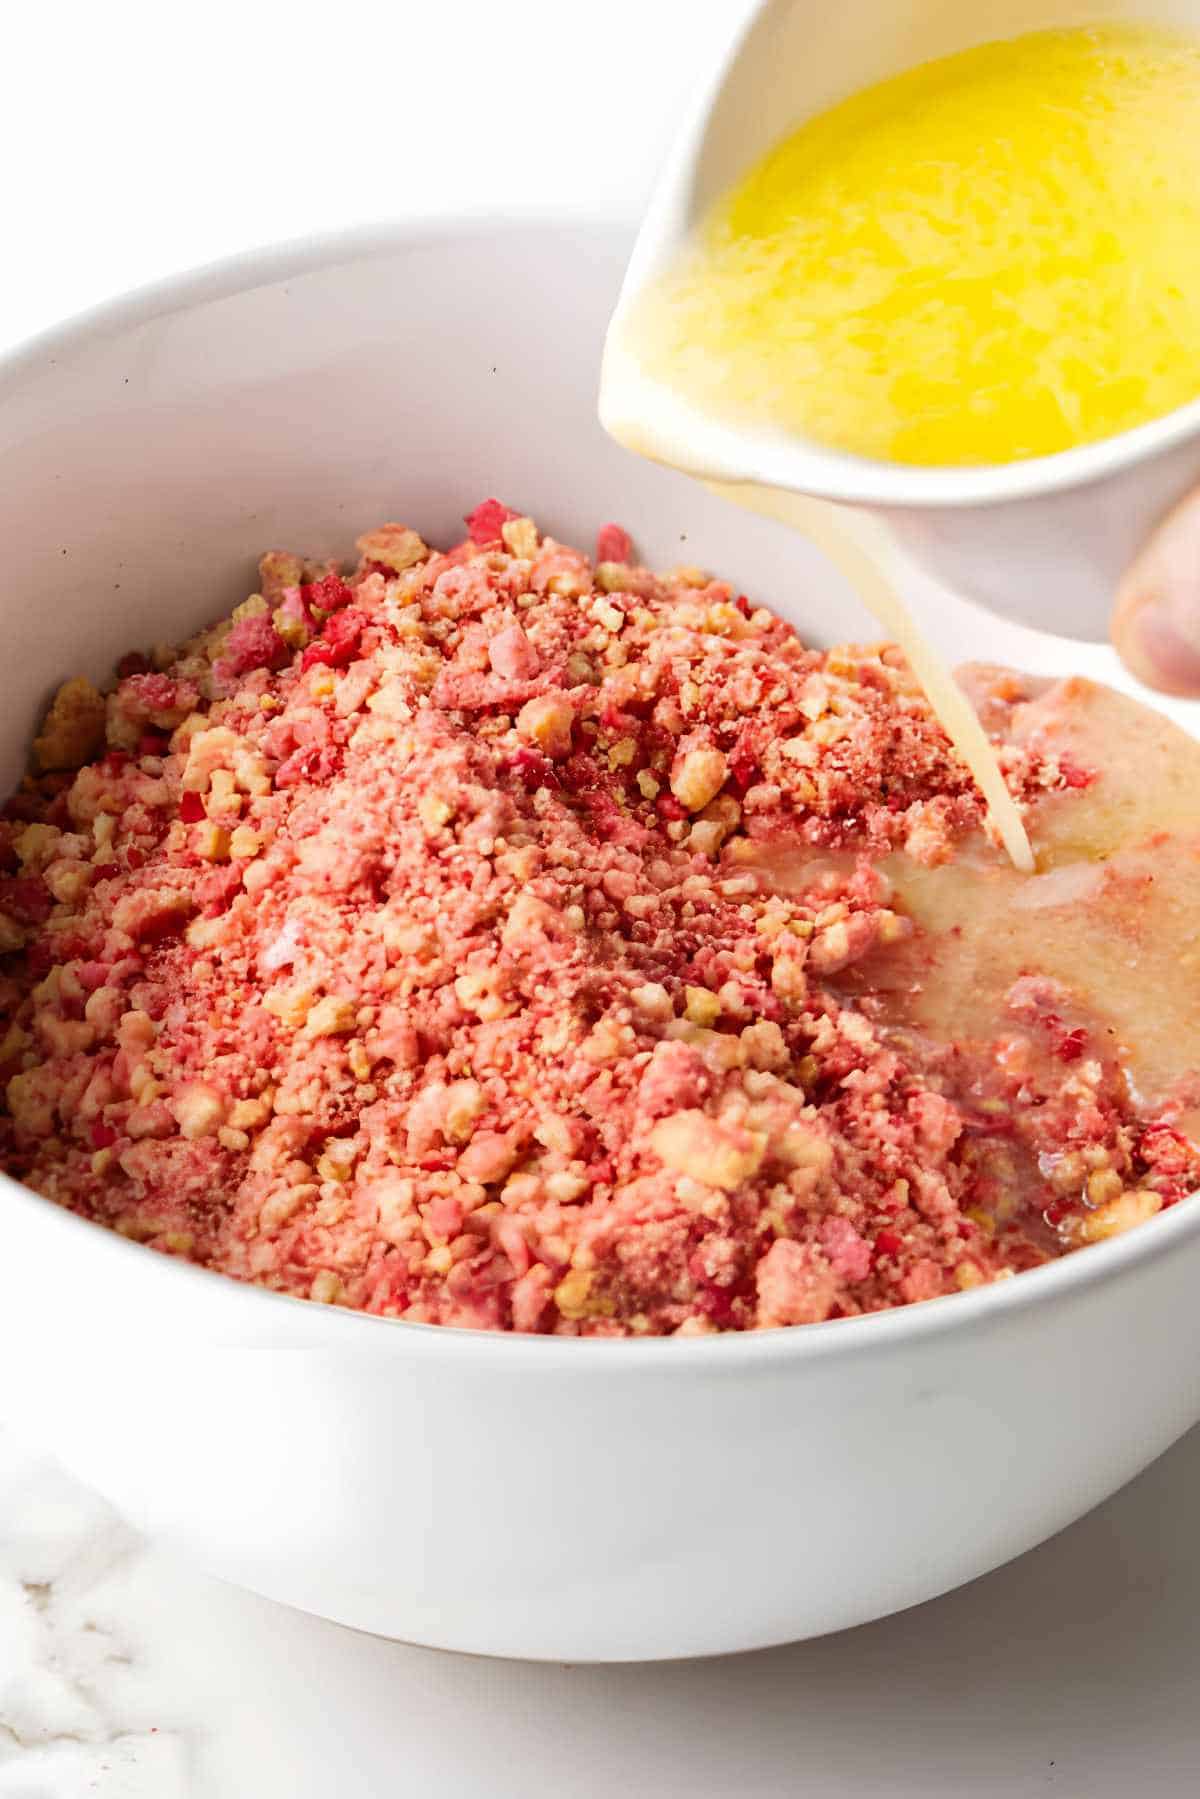 Adding melted butter to crushed pink crumbs.